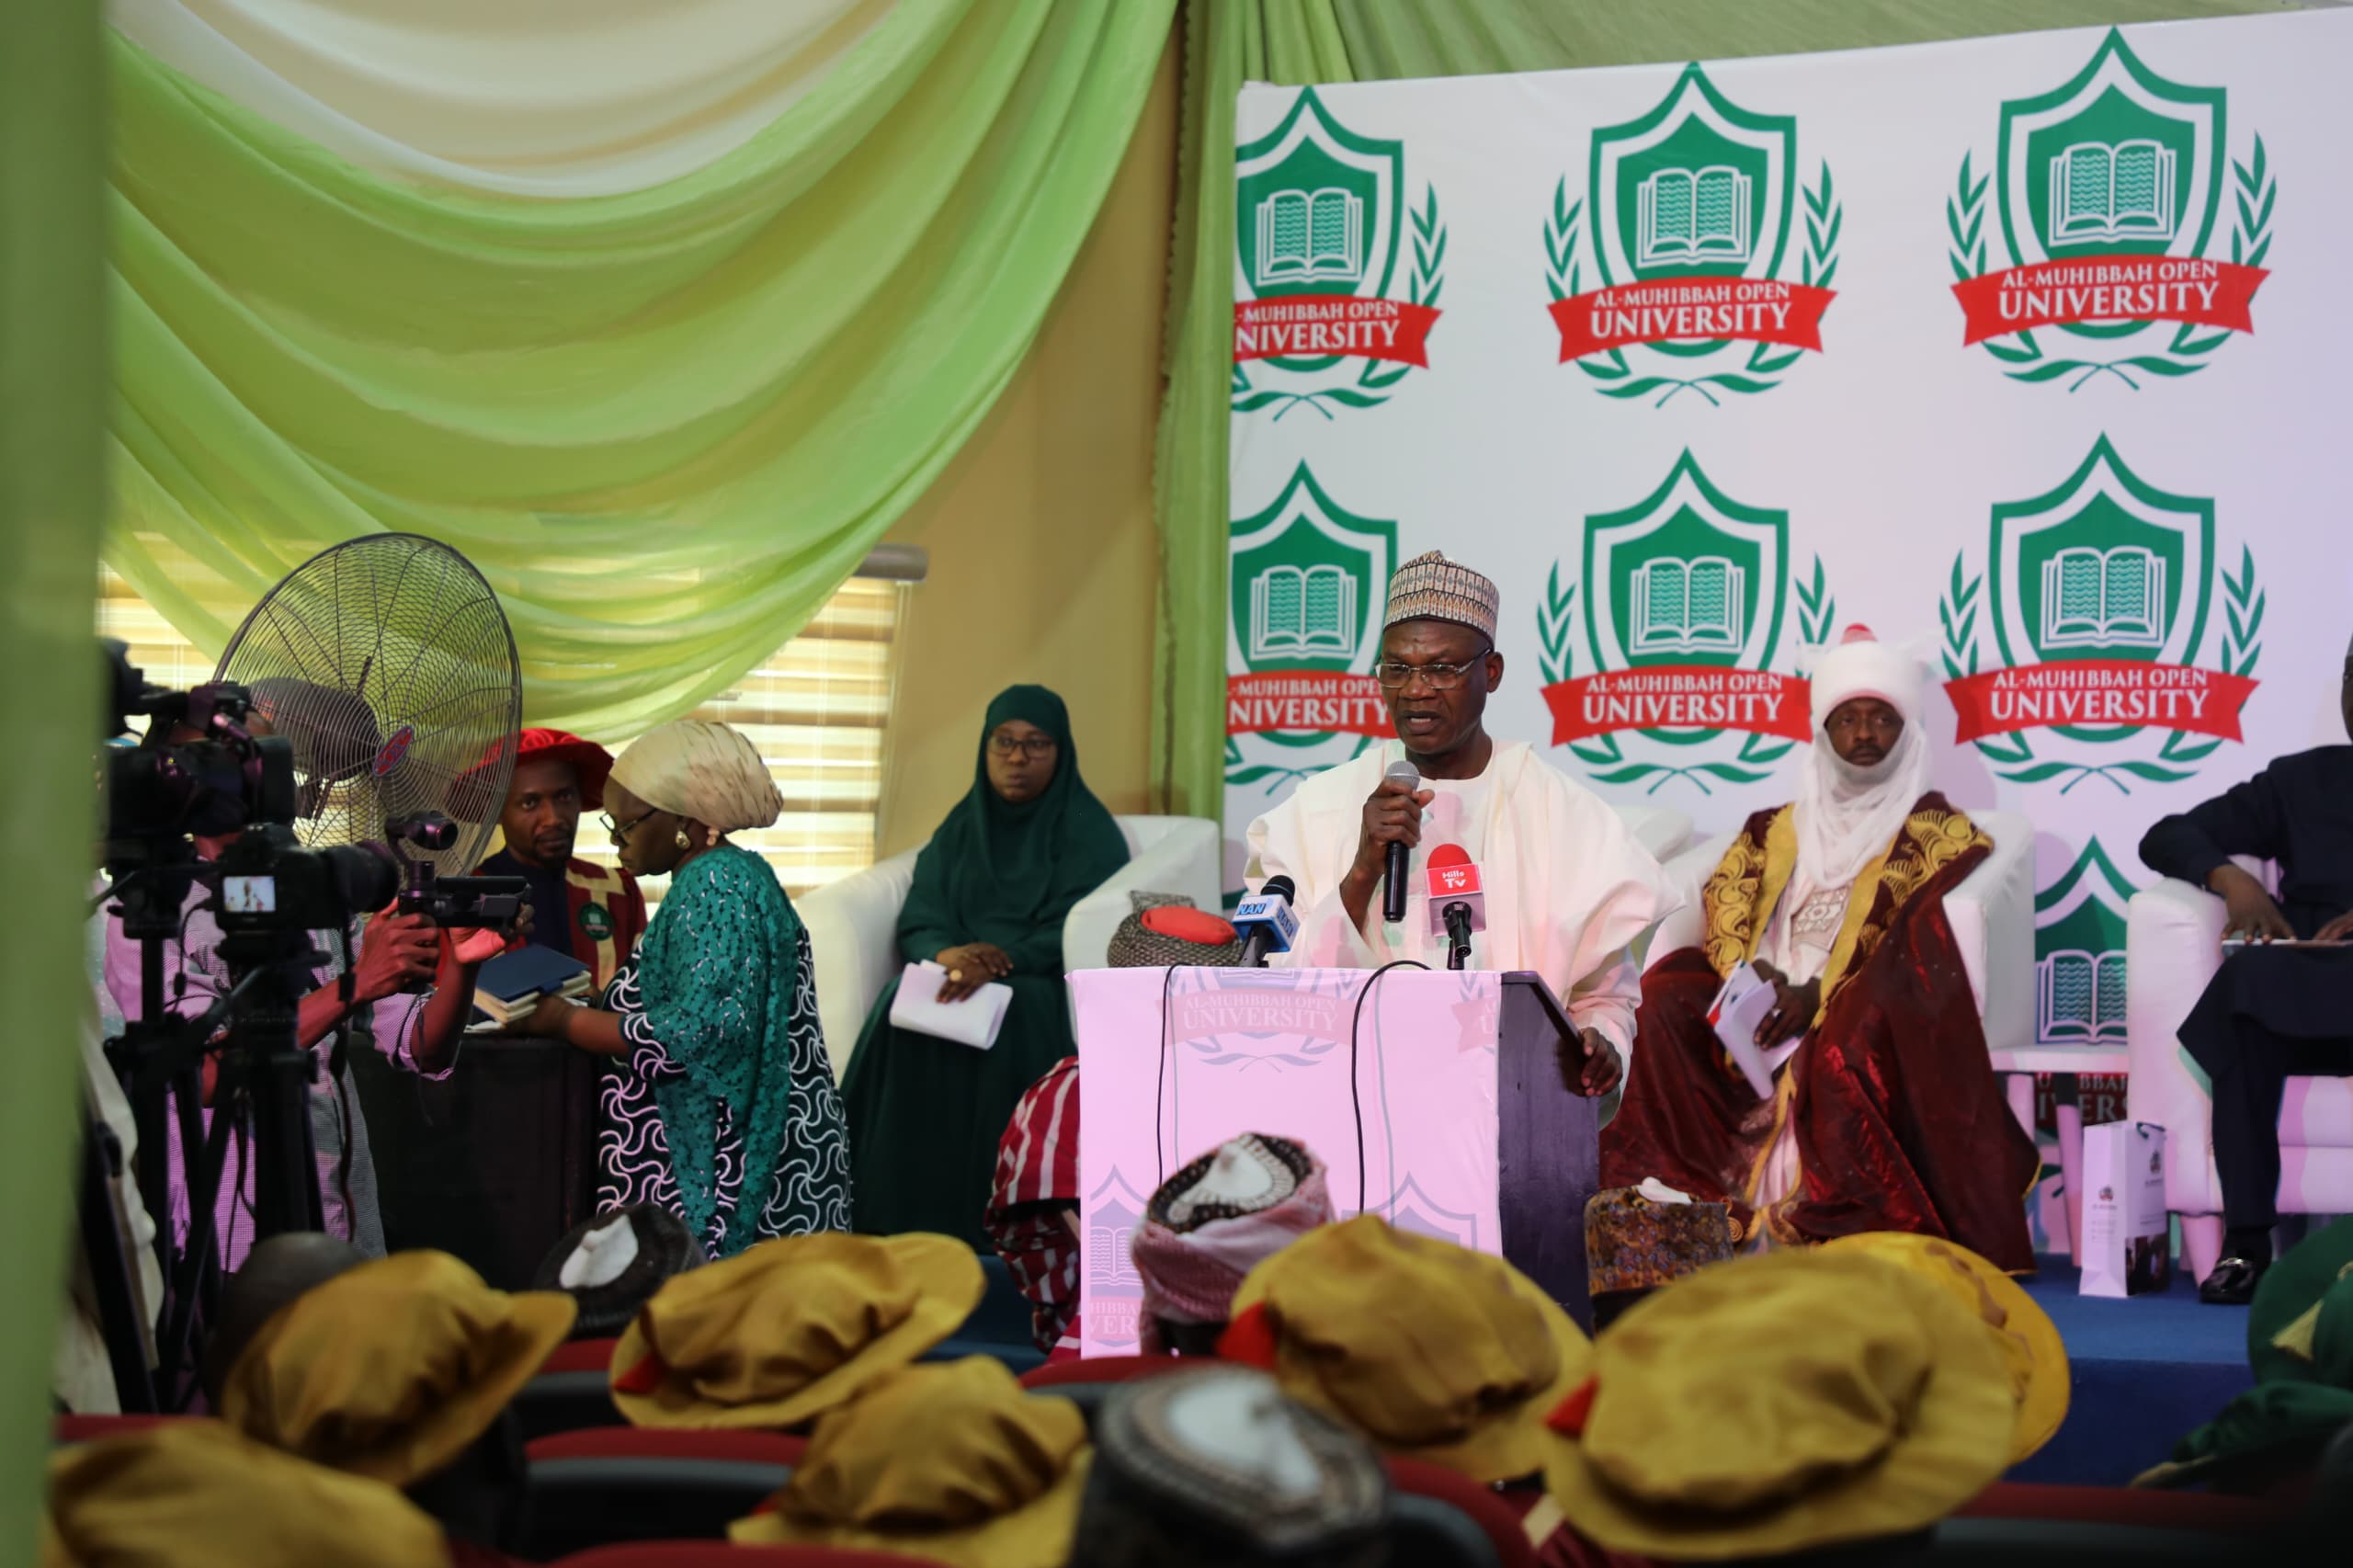 Minister asks Abuja's Al-Muhibbah Open University to focus on locally relevant courses